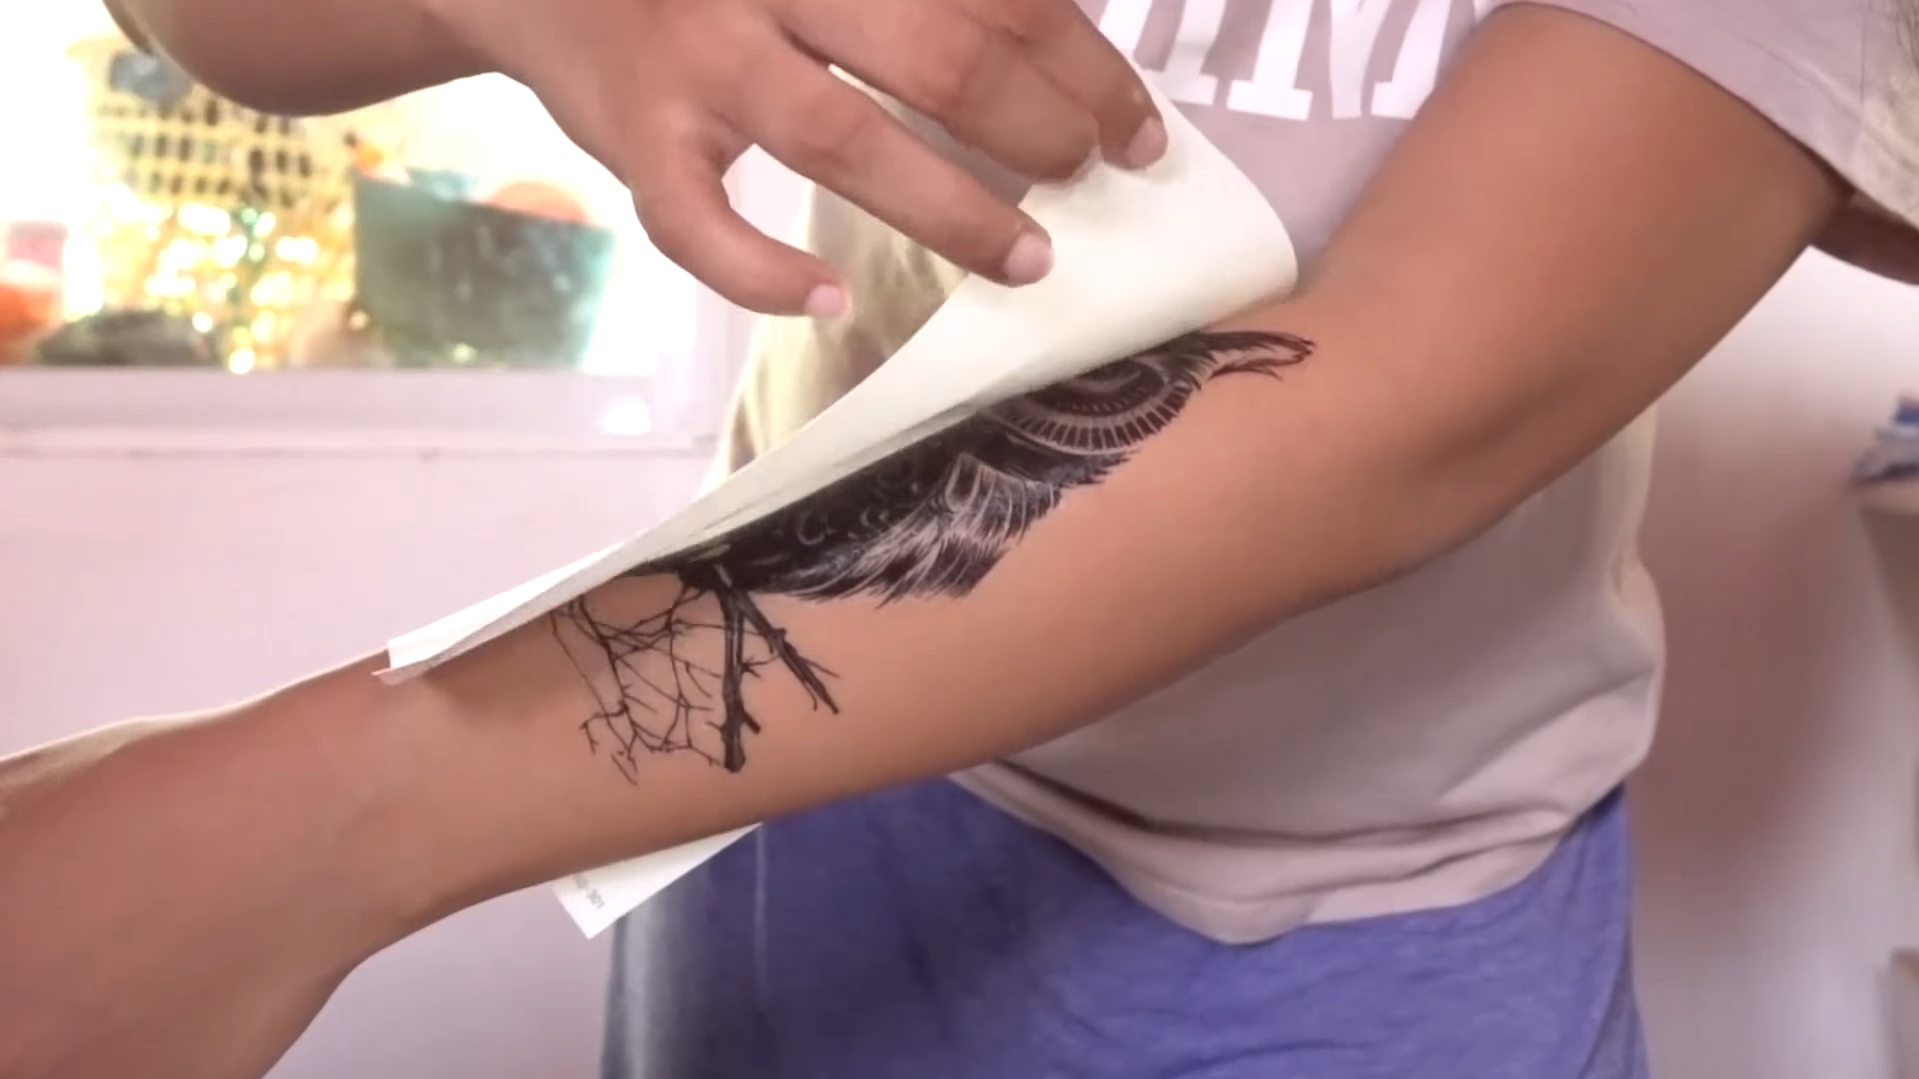 Steps to help extend the longevity of temporary tattoos: